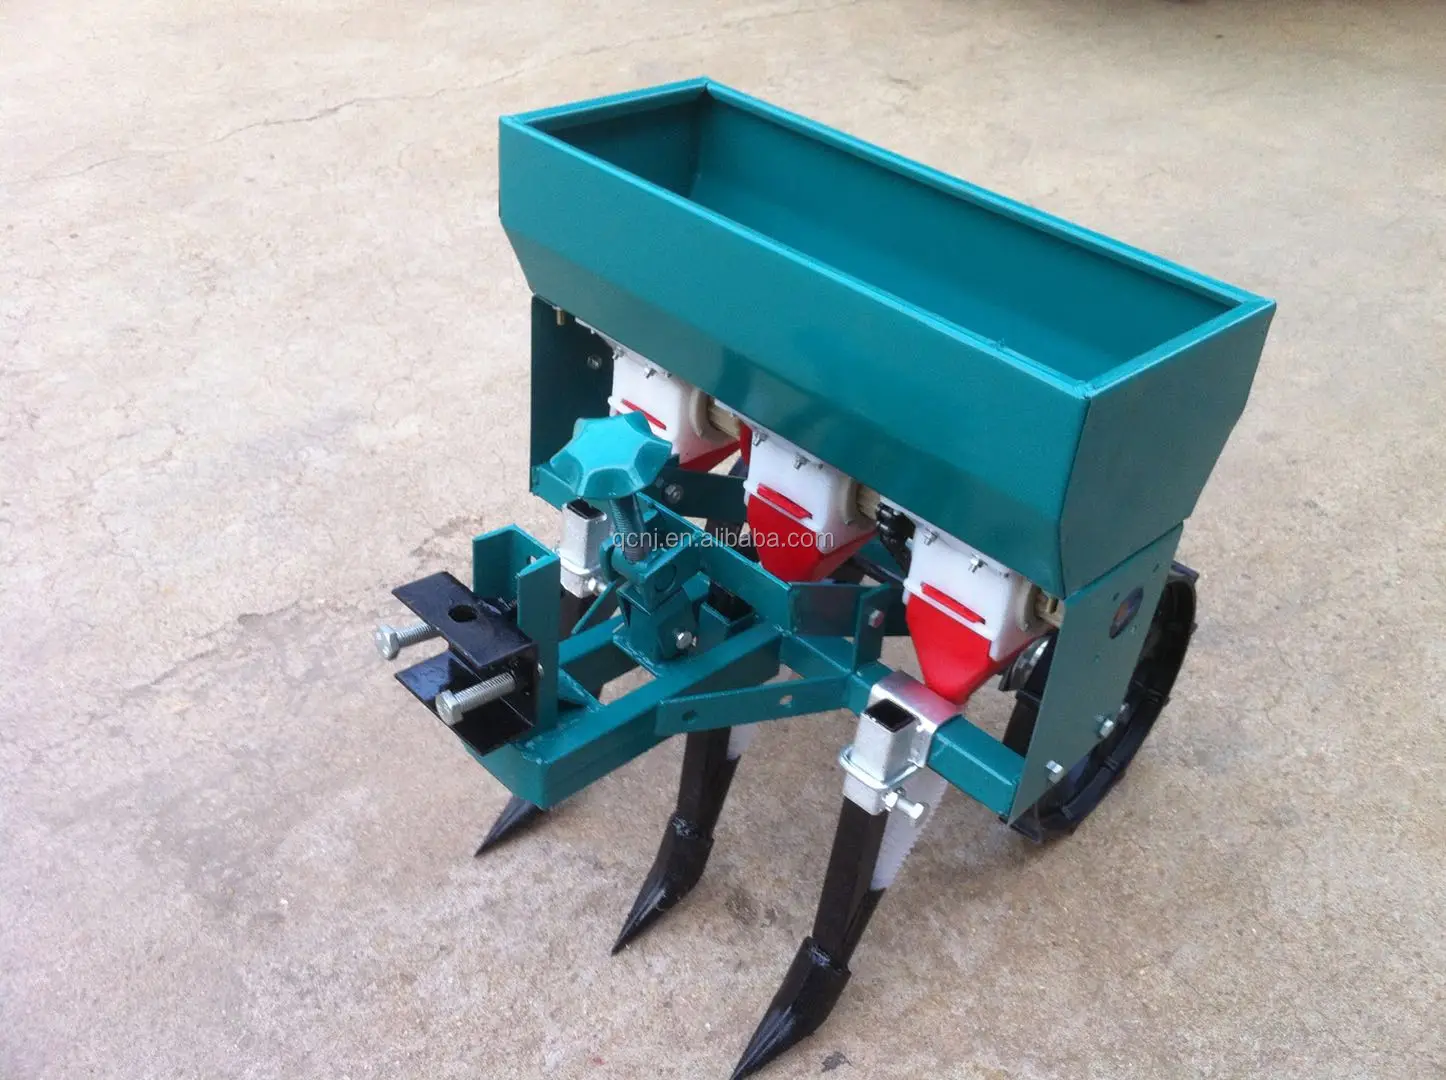 A Small Seeder With A Microtiller Belt Can Be Used To Plant A Variety ...